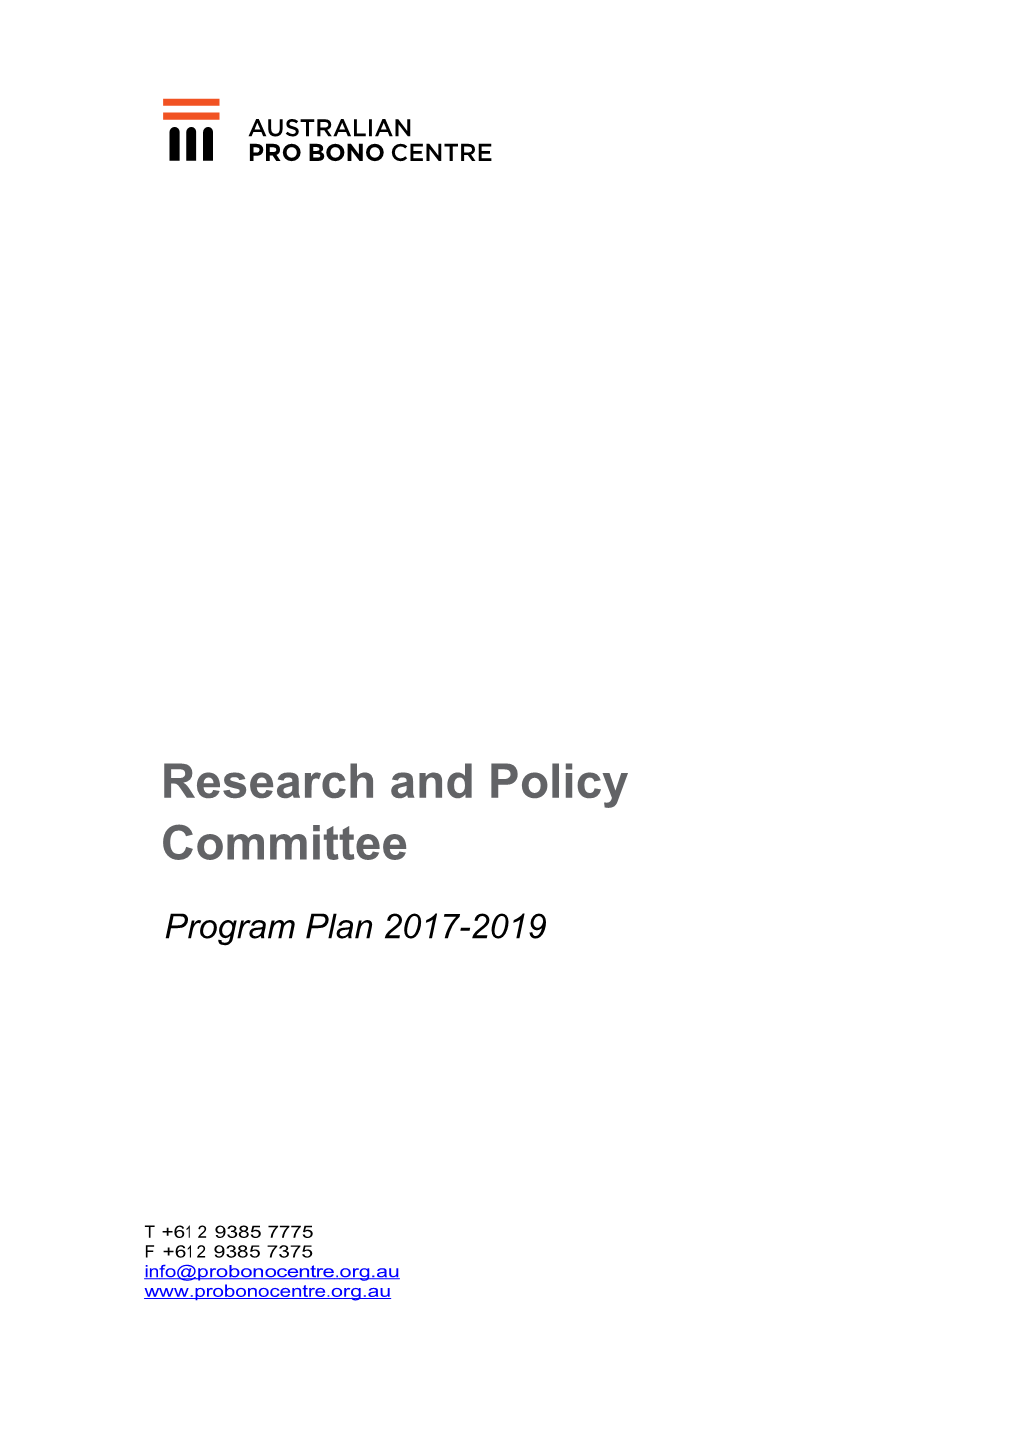 Research and Policy Committee